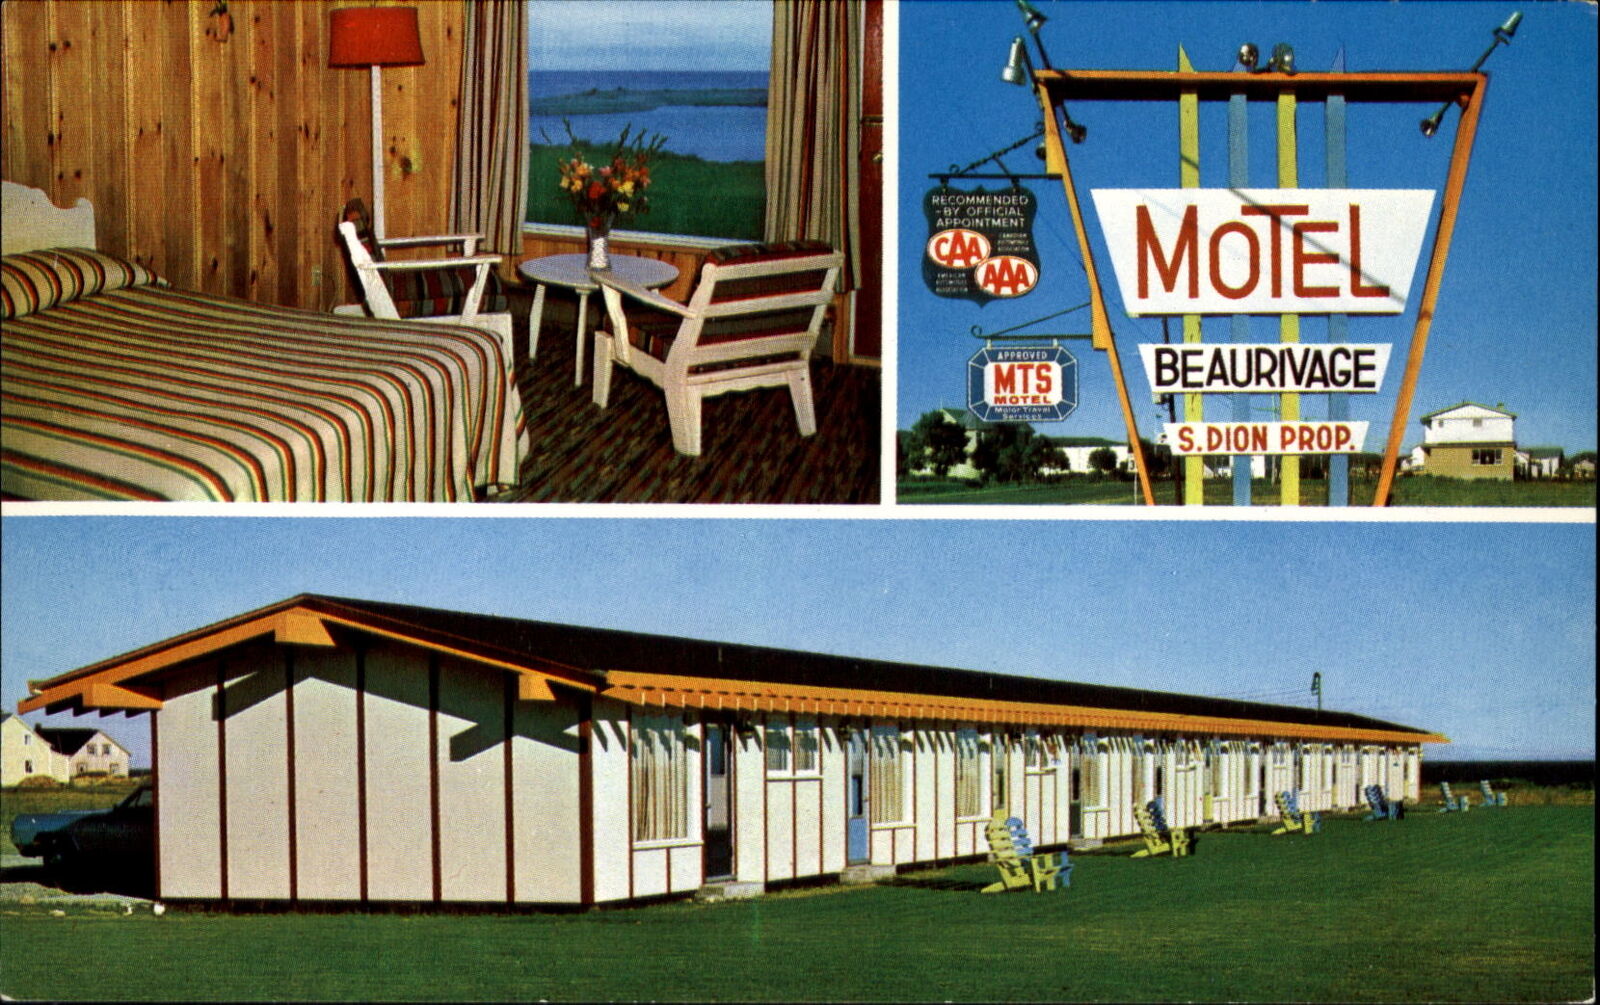 Hotel Motel Beaurivage ~ Ste Anne des Monts ~ Gaspe Quebec Canada ~ 1960s